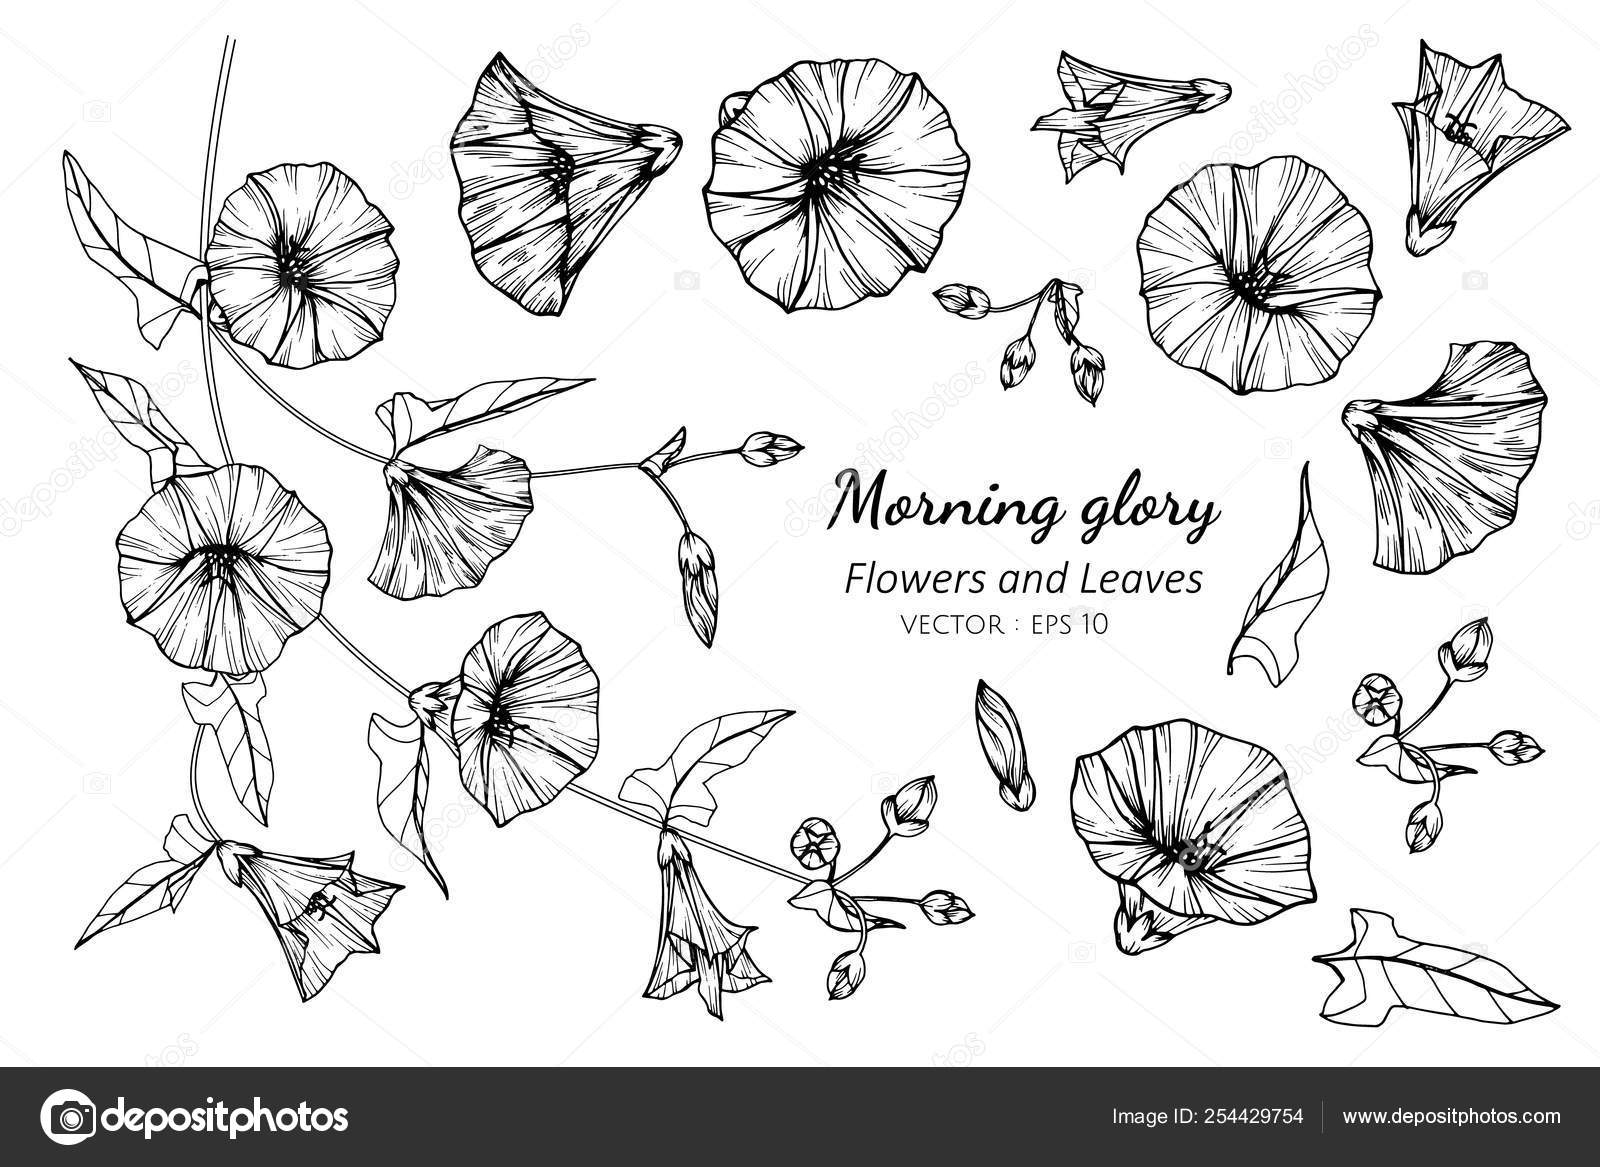 Morning Glory Flower Stock Vectors Royalty Free Morning Glory Flower Illustrations Page 4 Depositphotos